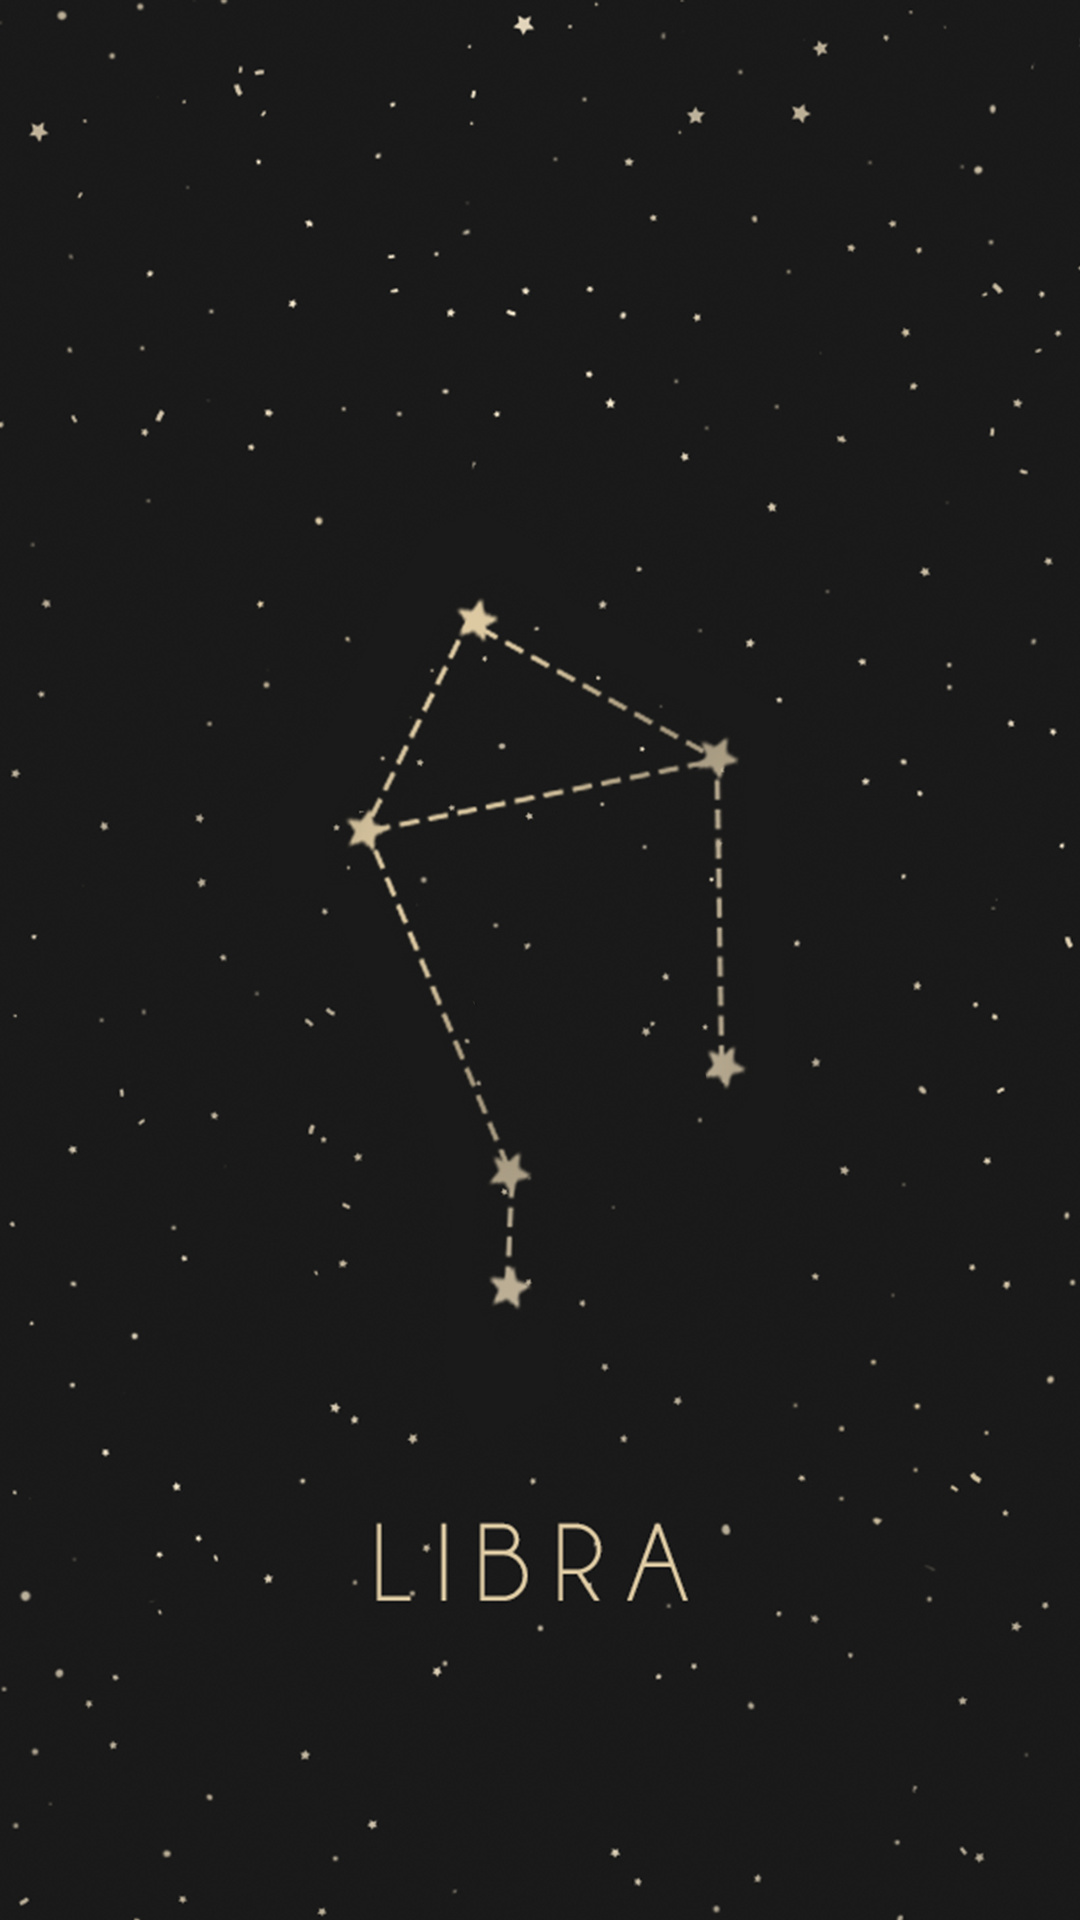 Libra constellation, Zodiac sign, Backgrounds, Wallpapers, 1080x1920 Full HD Handy